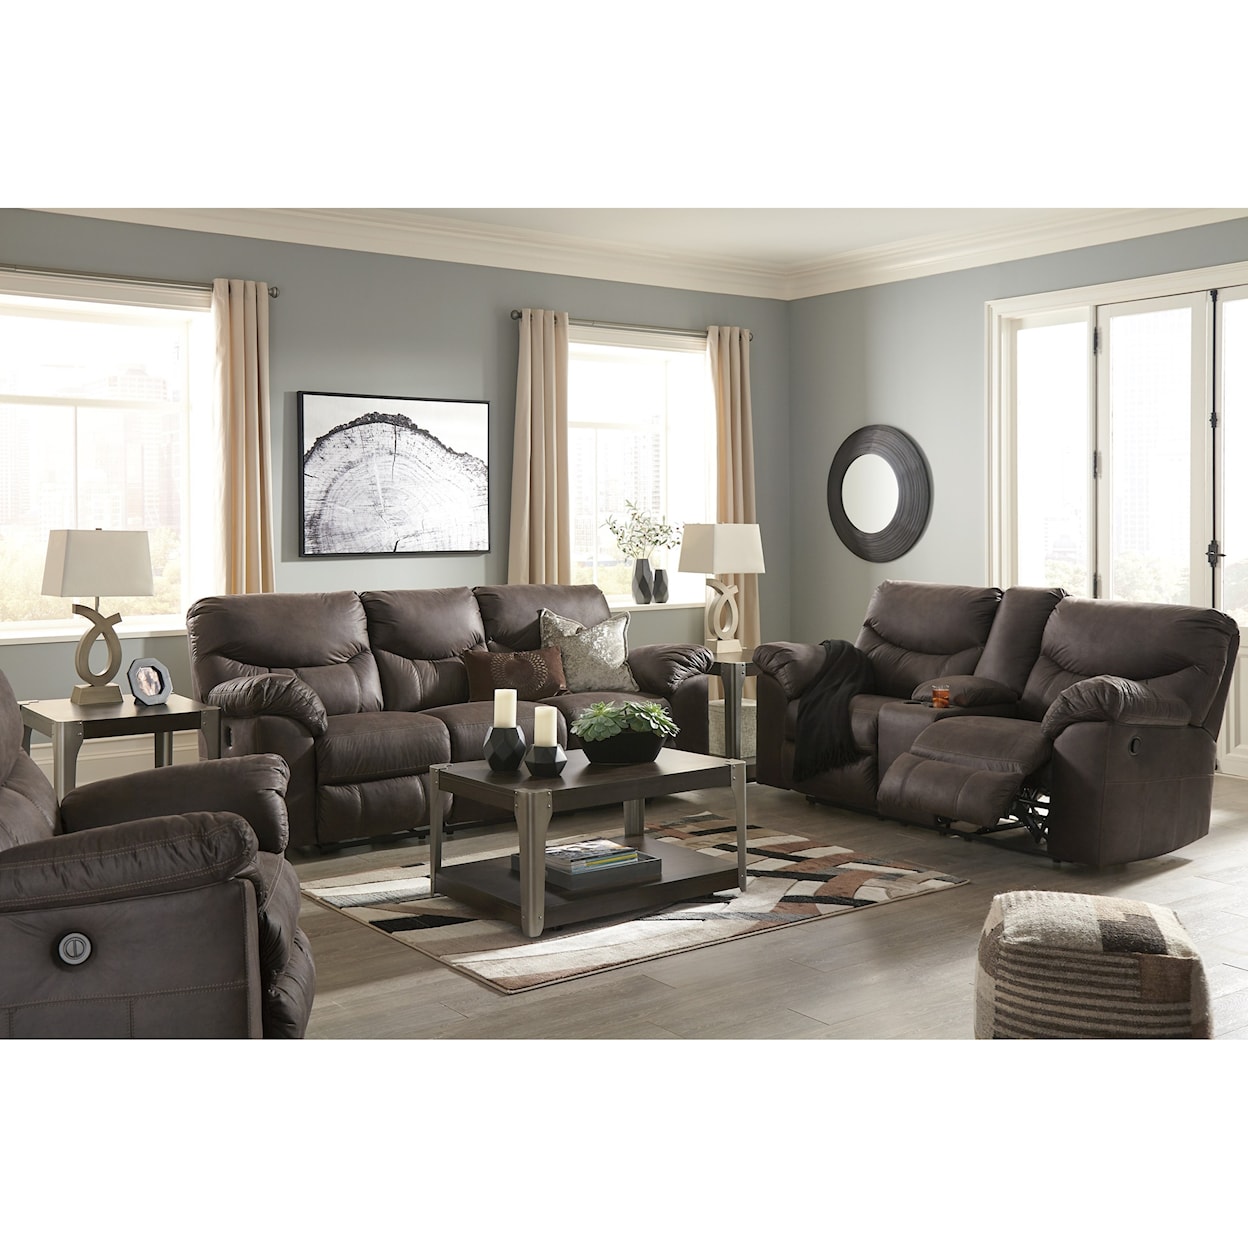 Signature Baxter Reclining Living Room Group